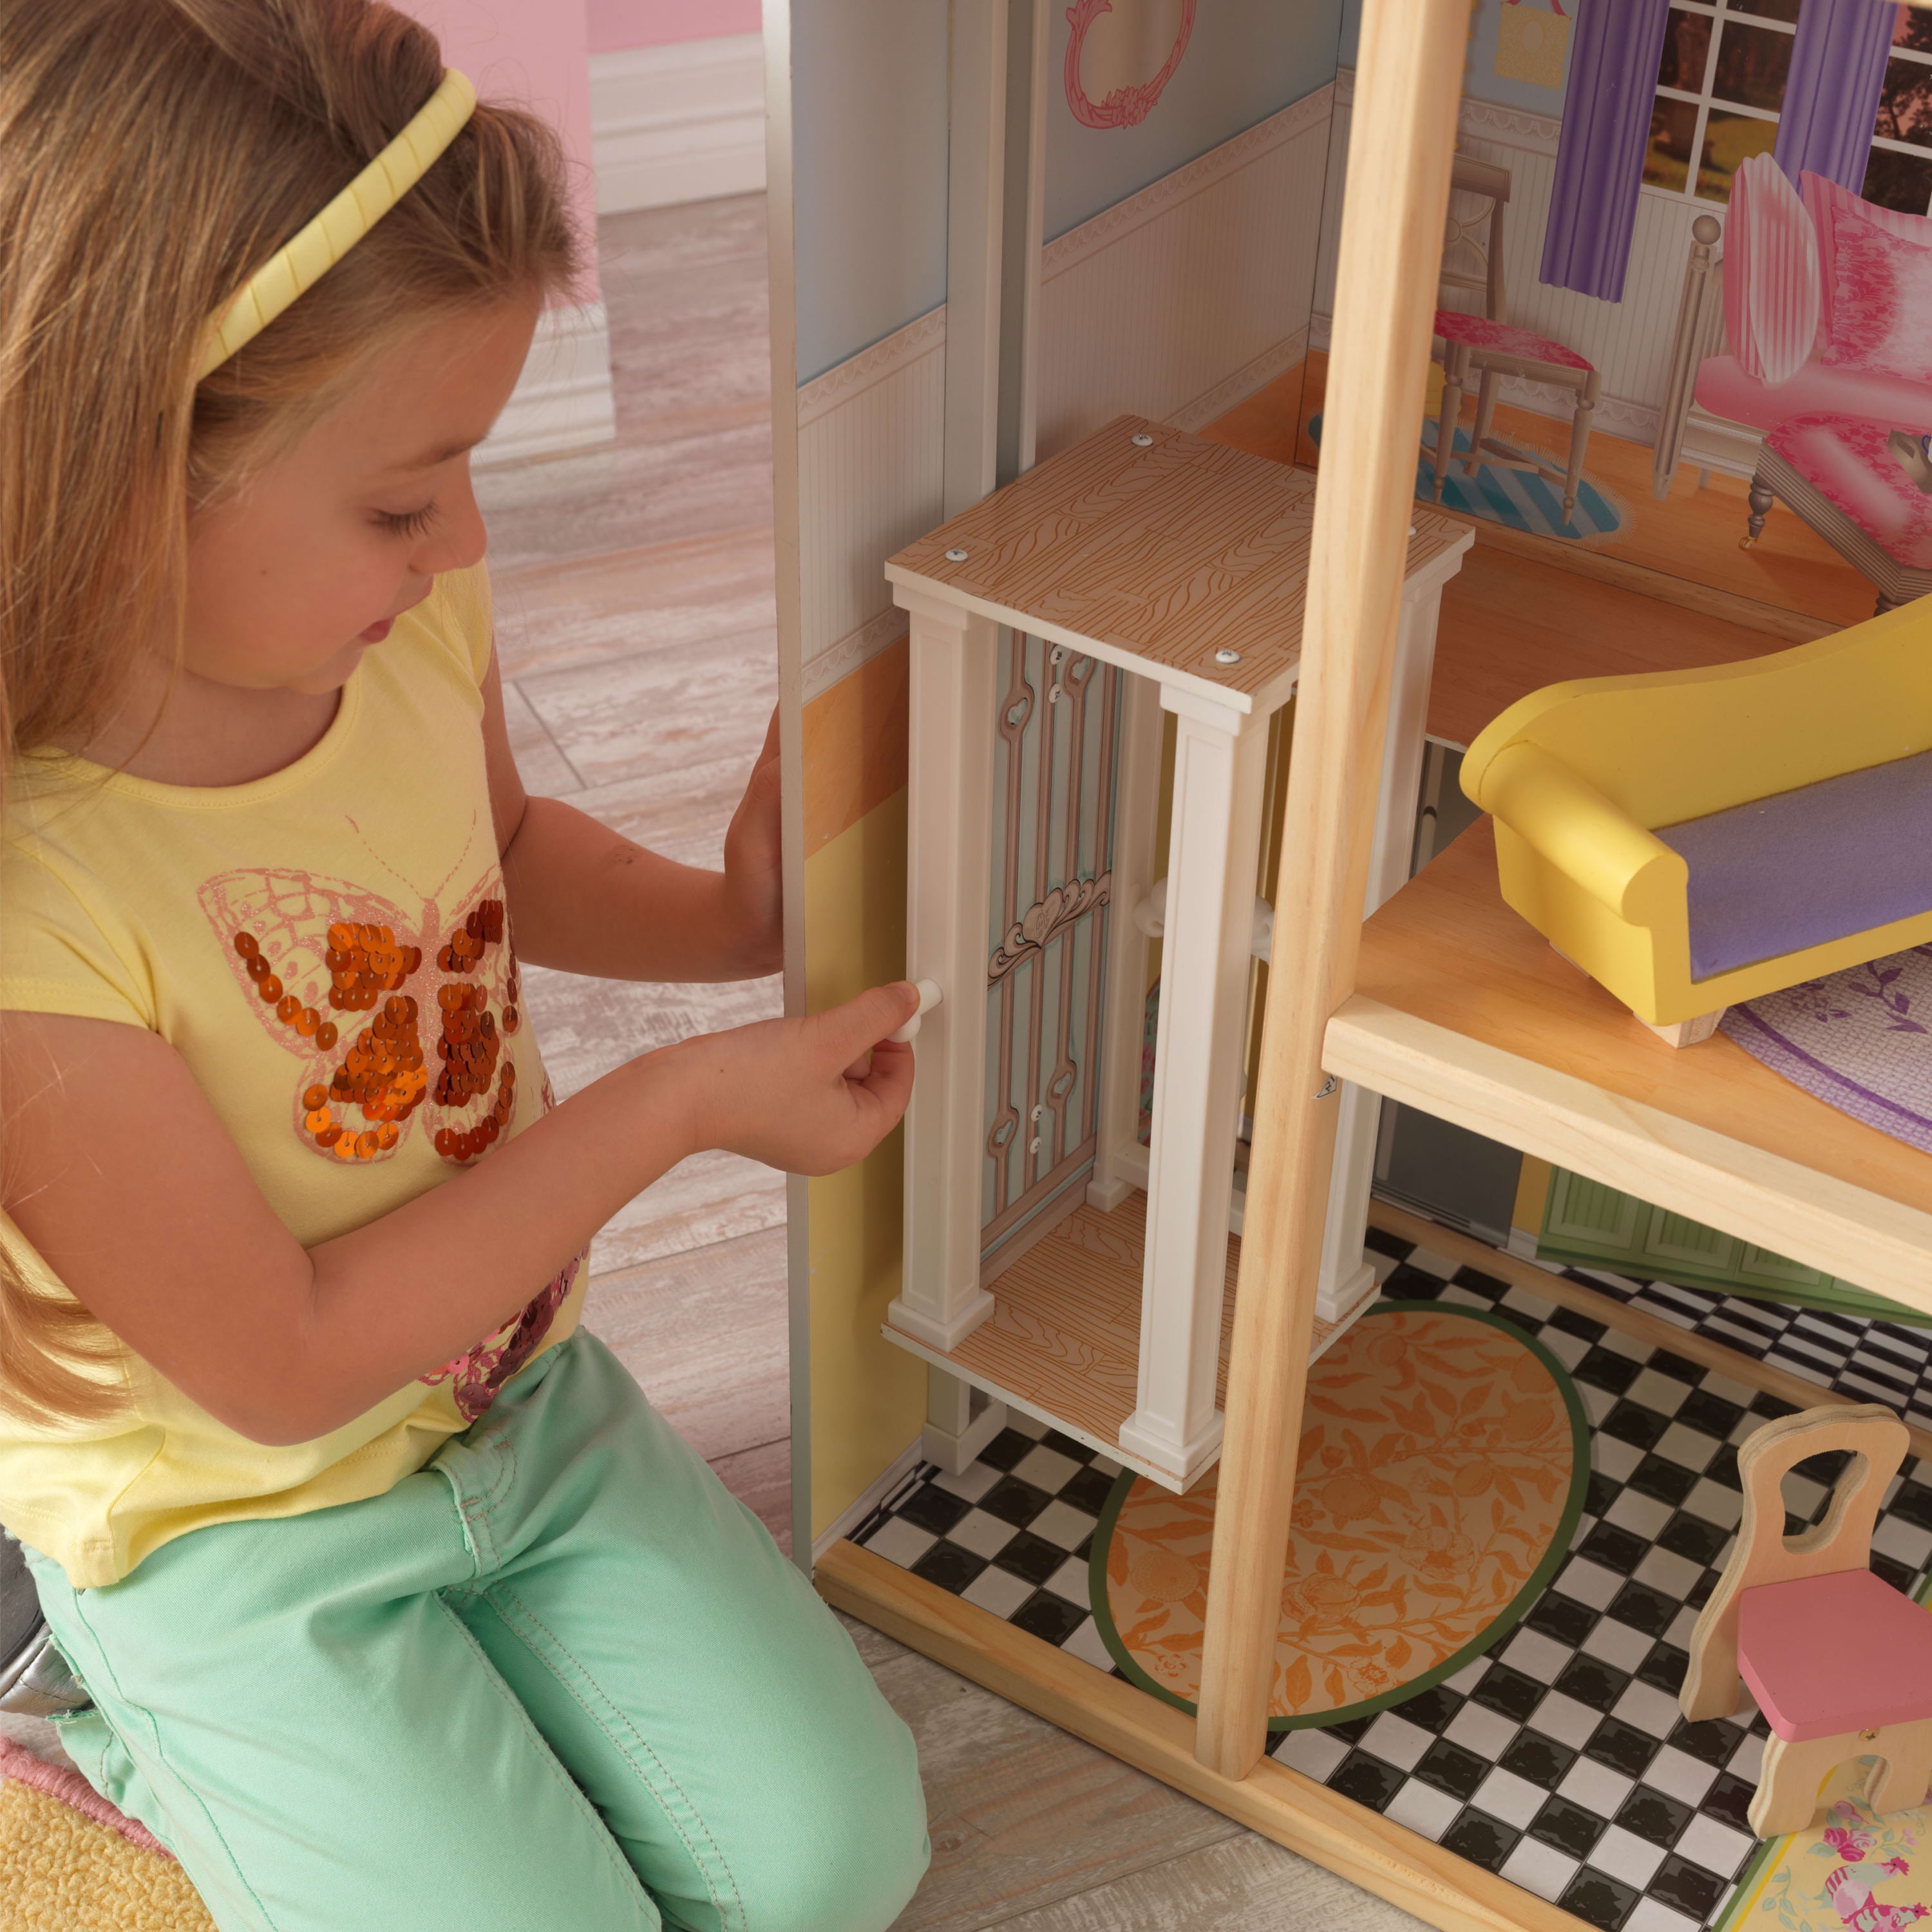 KidKraft Kaylee Wooden Dollhouse, Almost with 4 Elevator, 10 Accessories Feet Stairs and Tall